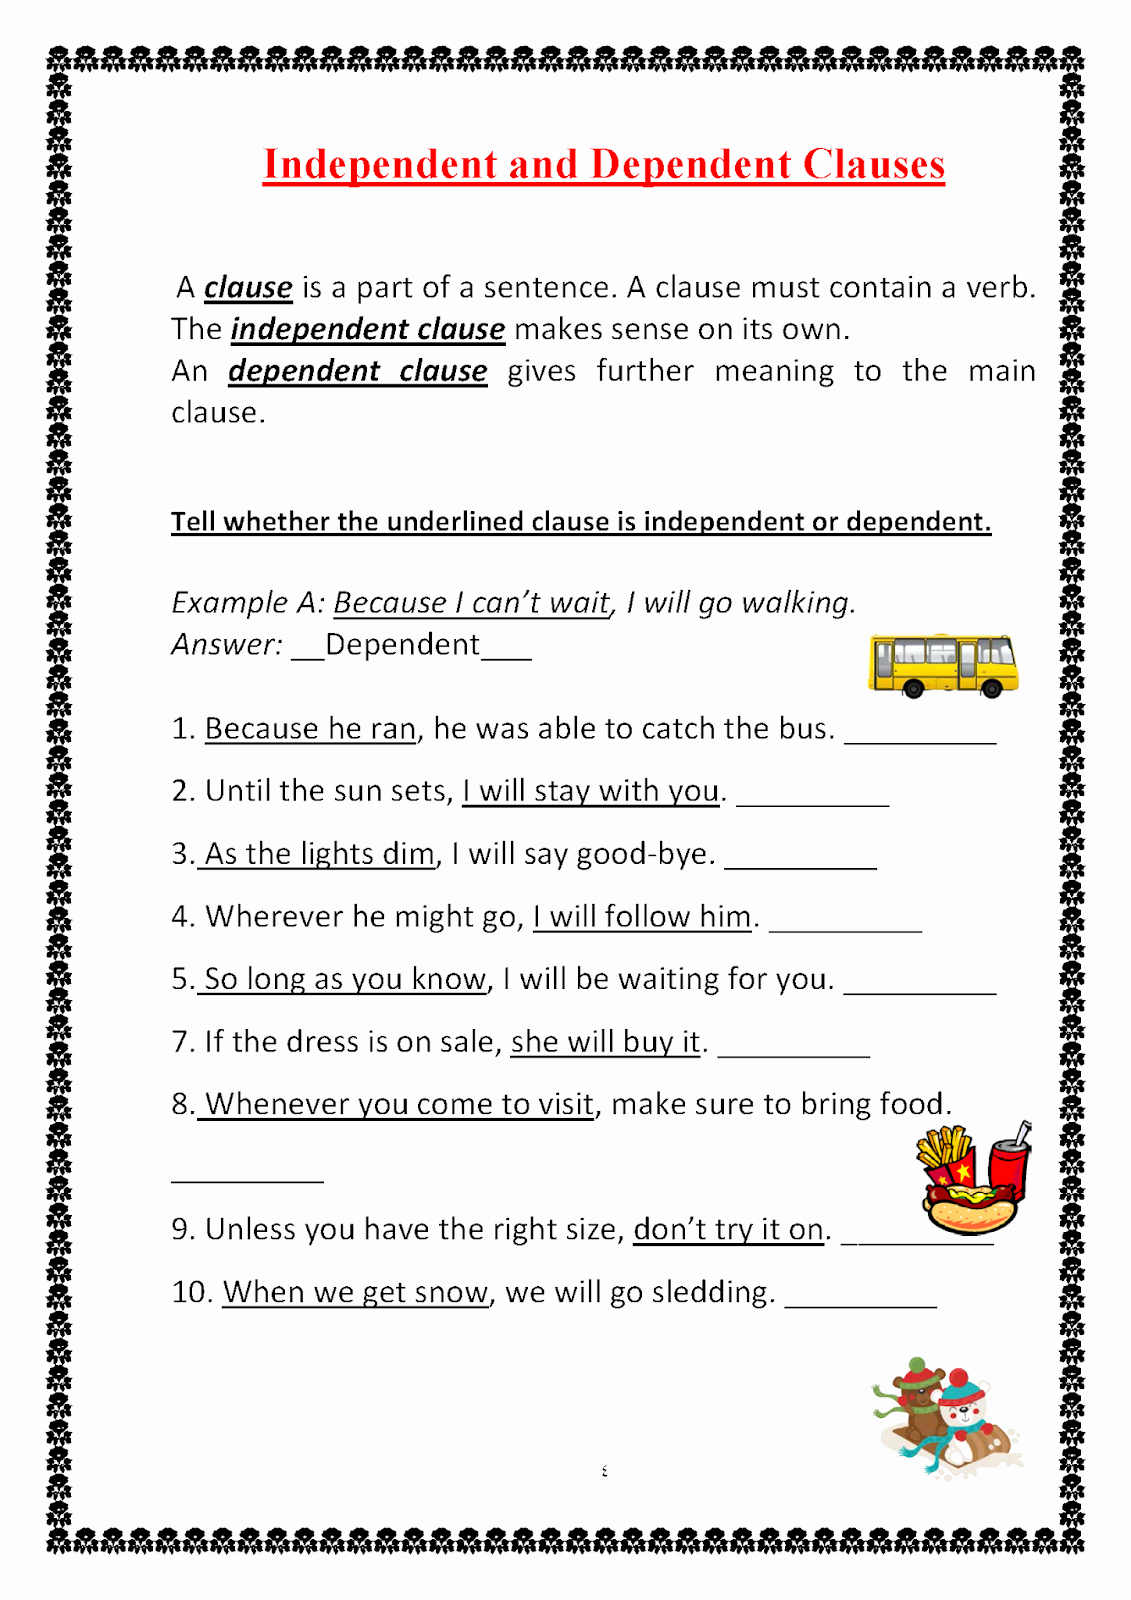 Independent and Dependent Clauses Worksheet Inspirational Independent and Dependent Subordinate Clauses Worksheet